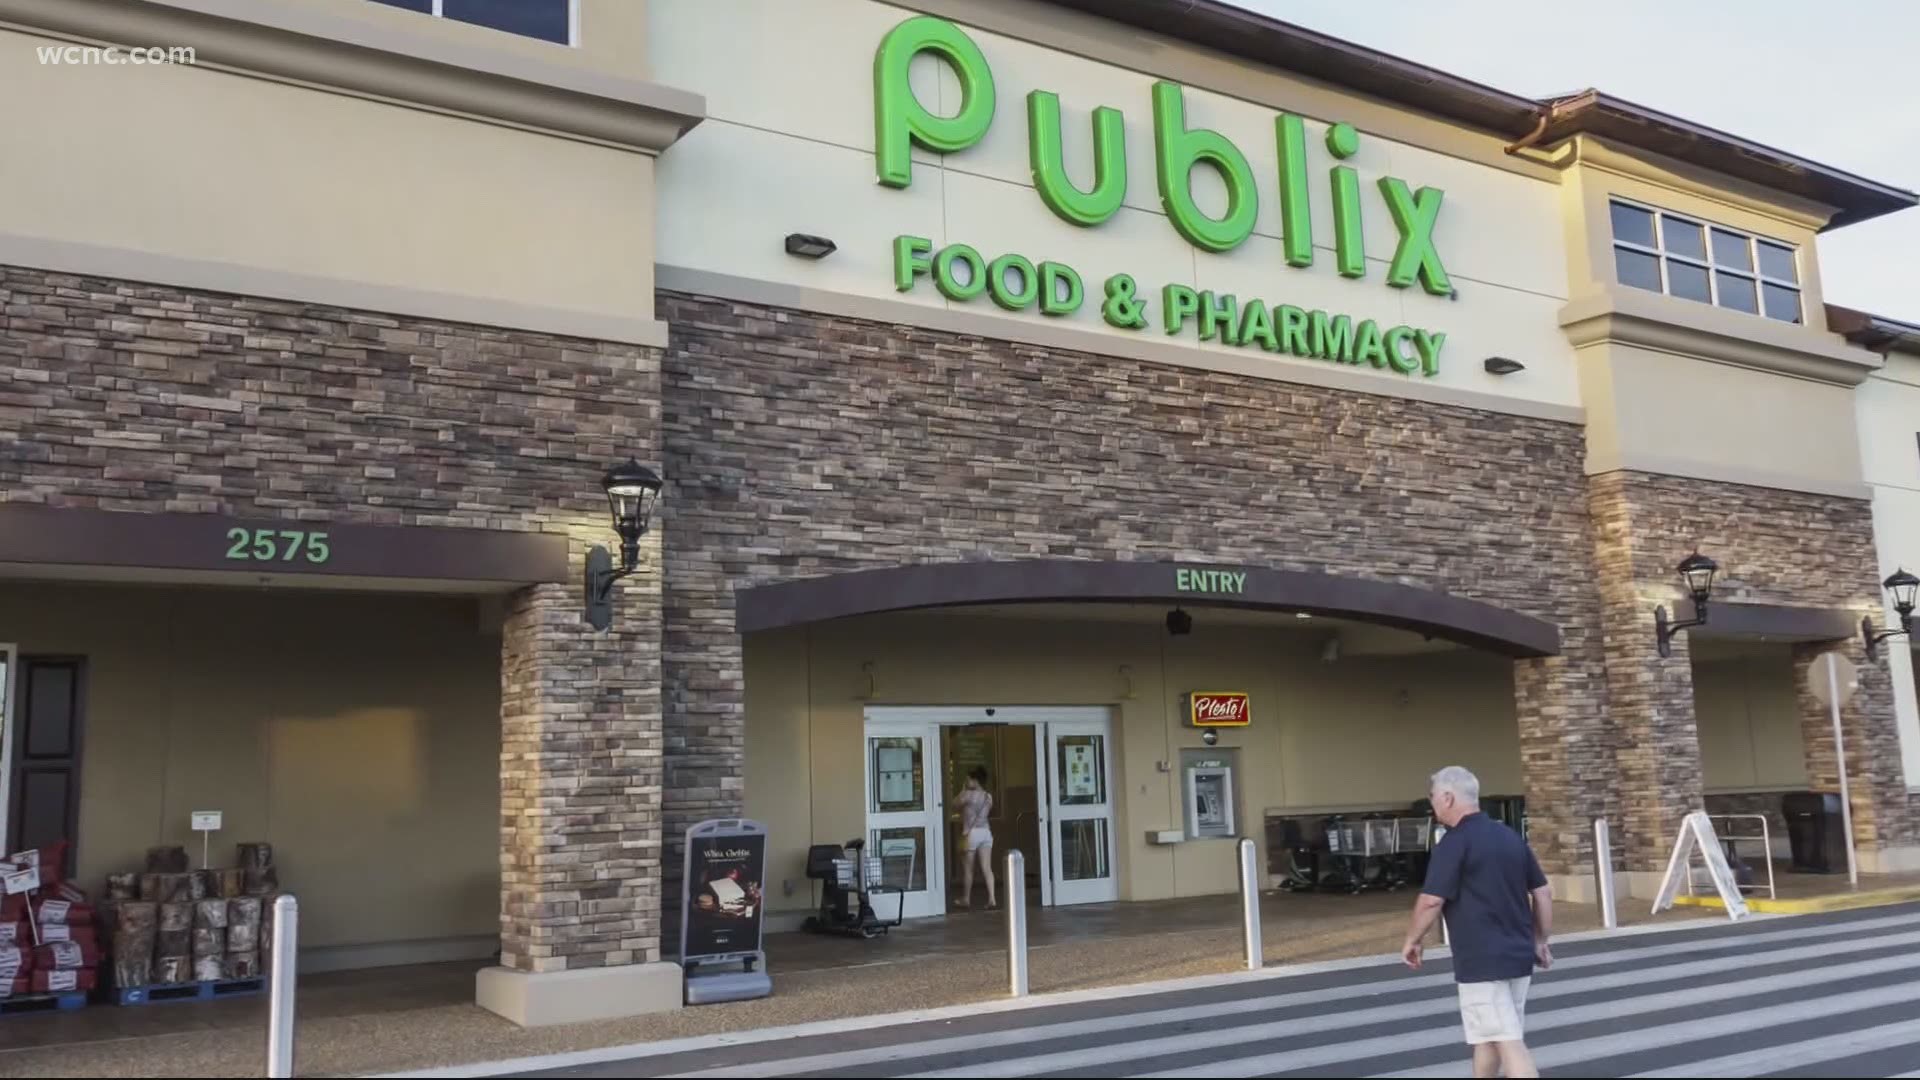 Publix announced it will begin offering COVID-19 vaccines by appointment in South Carolina starting Tuesday.